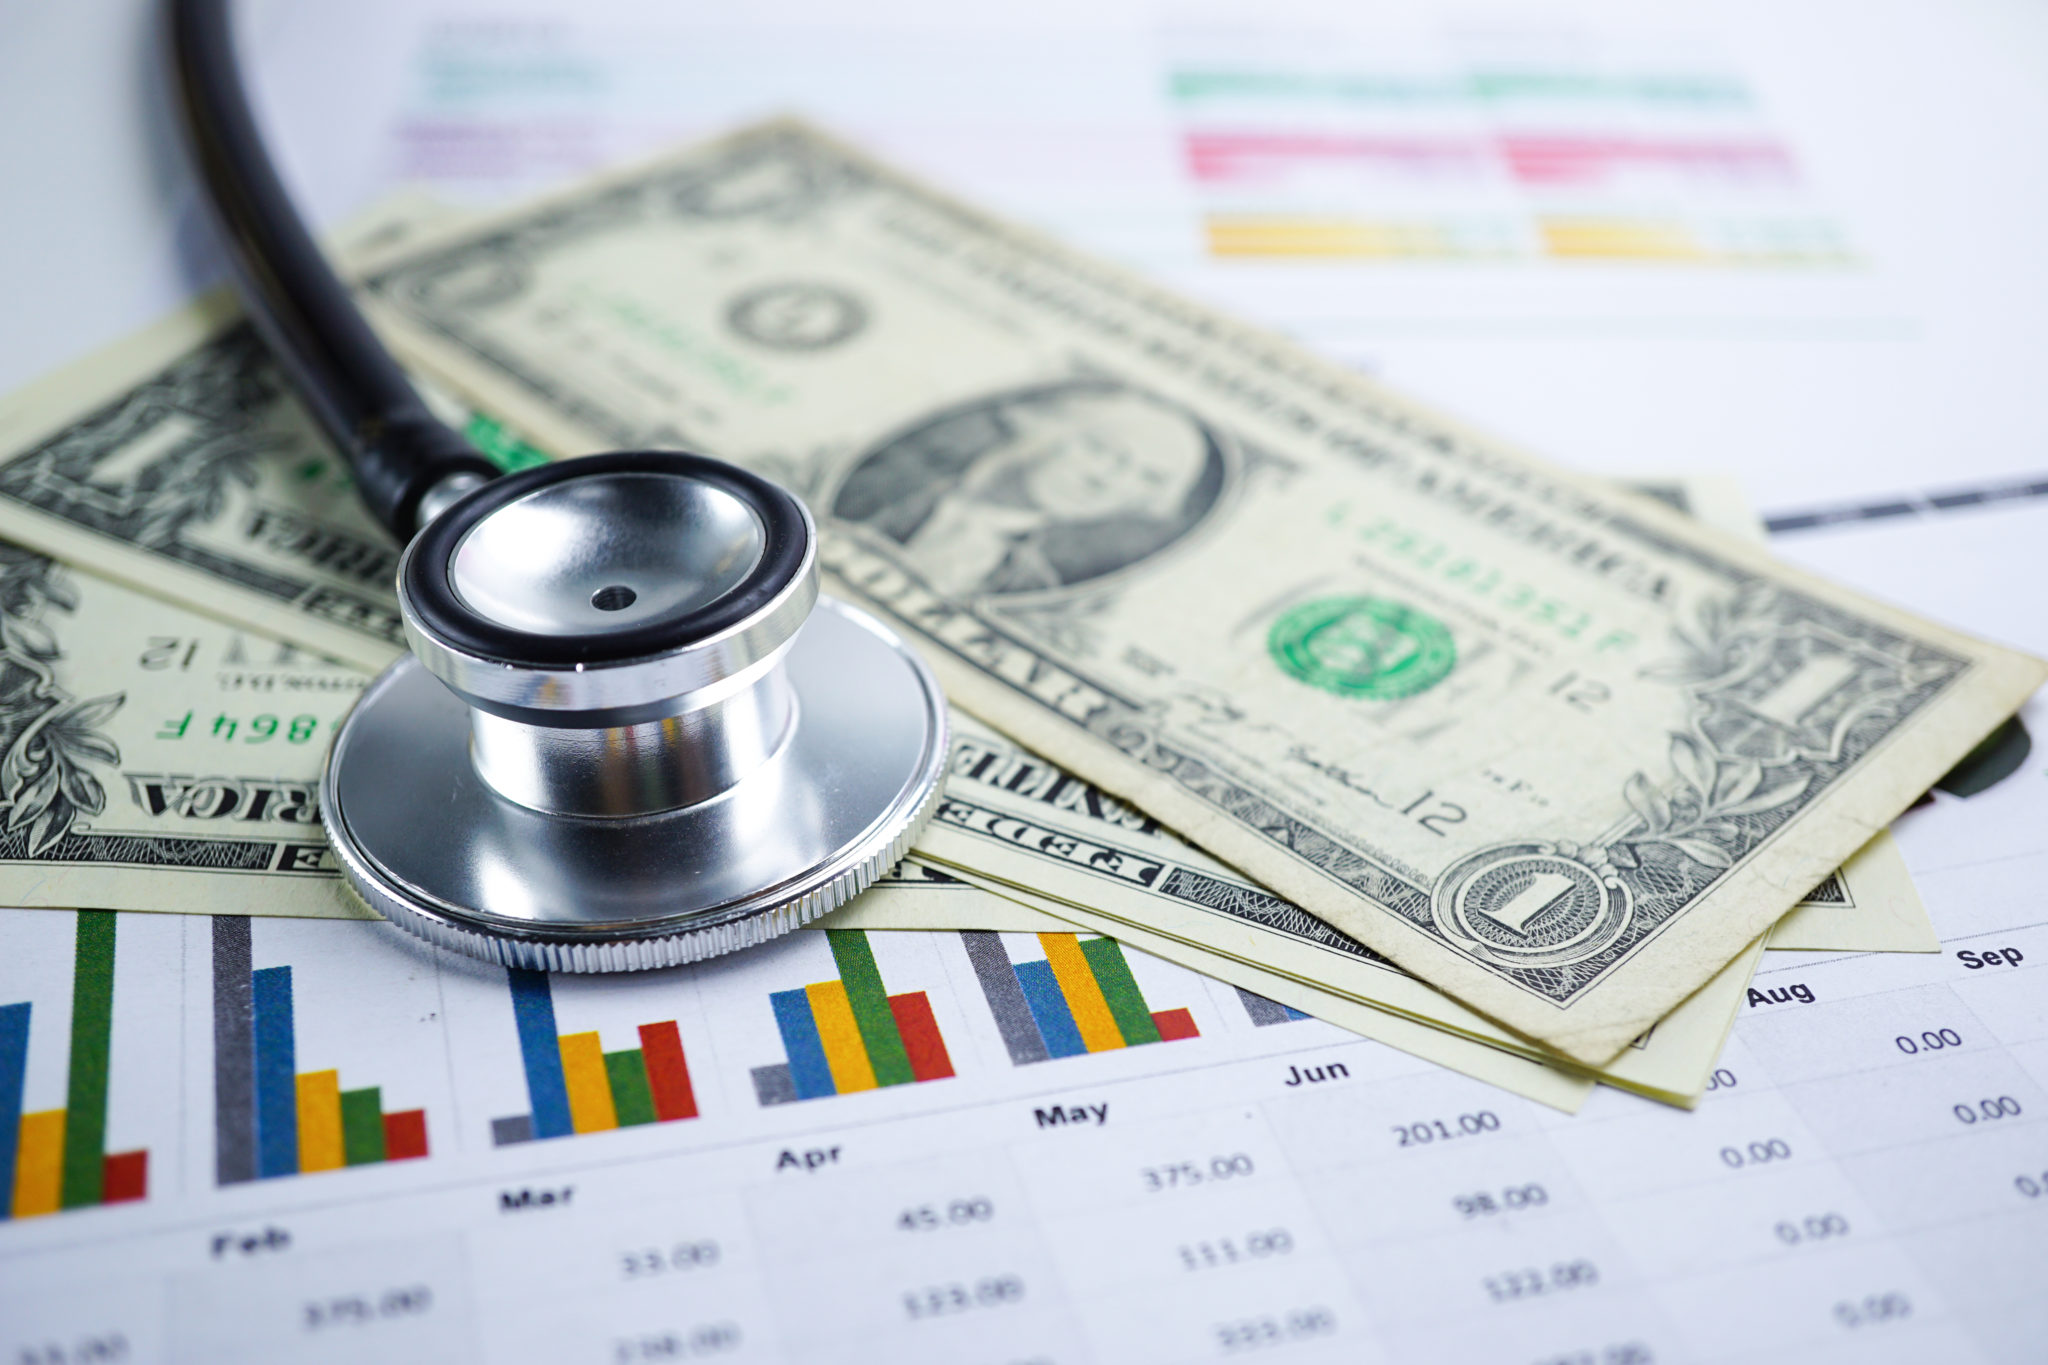 2021 Medicare Physician Fee Schedule